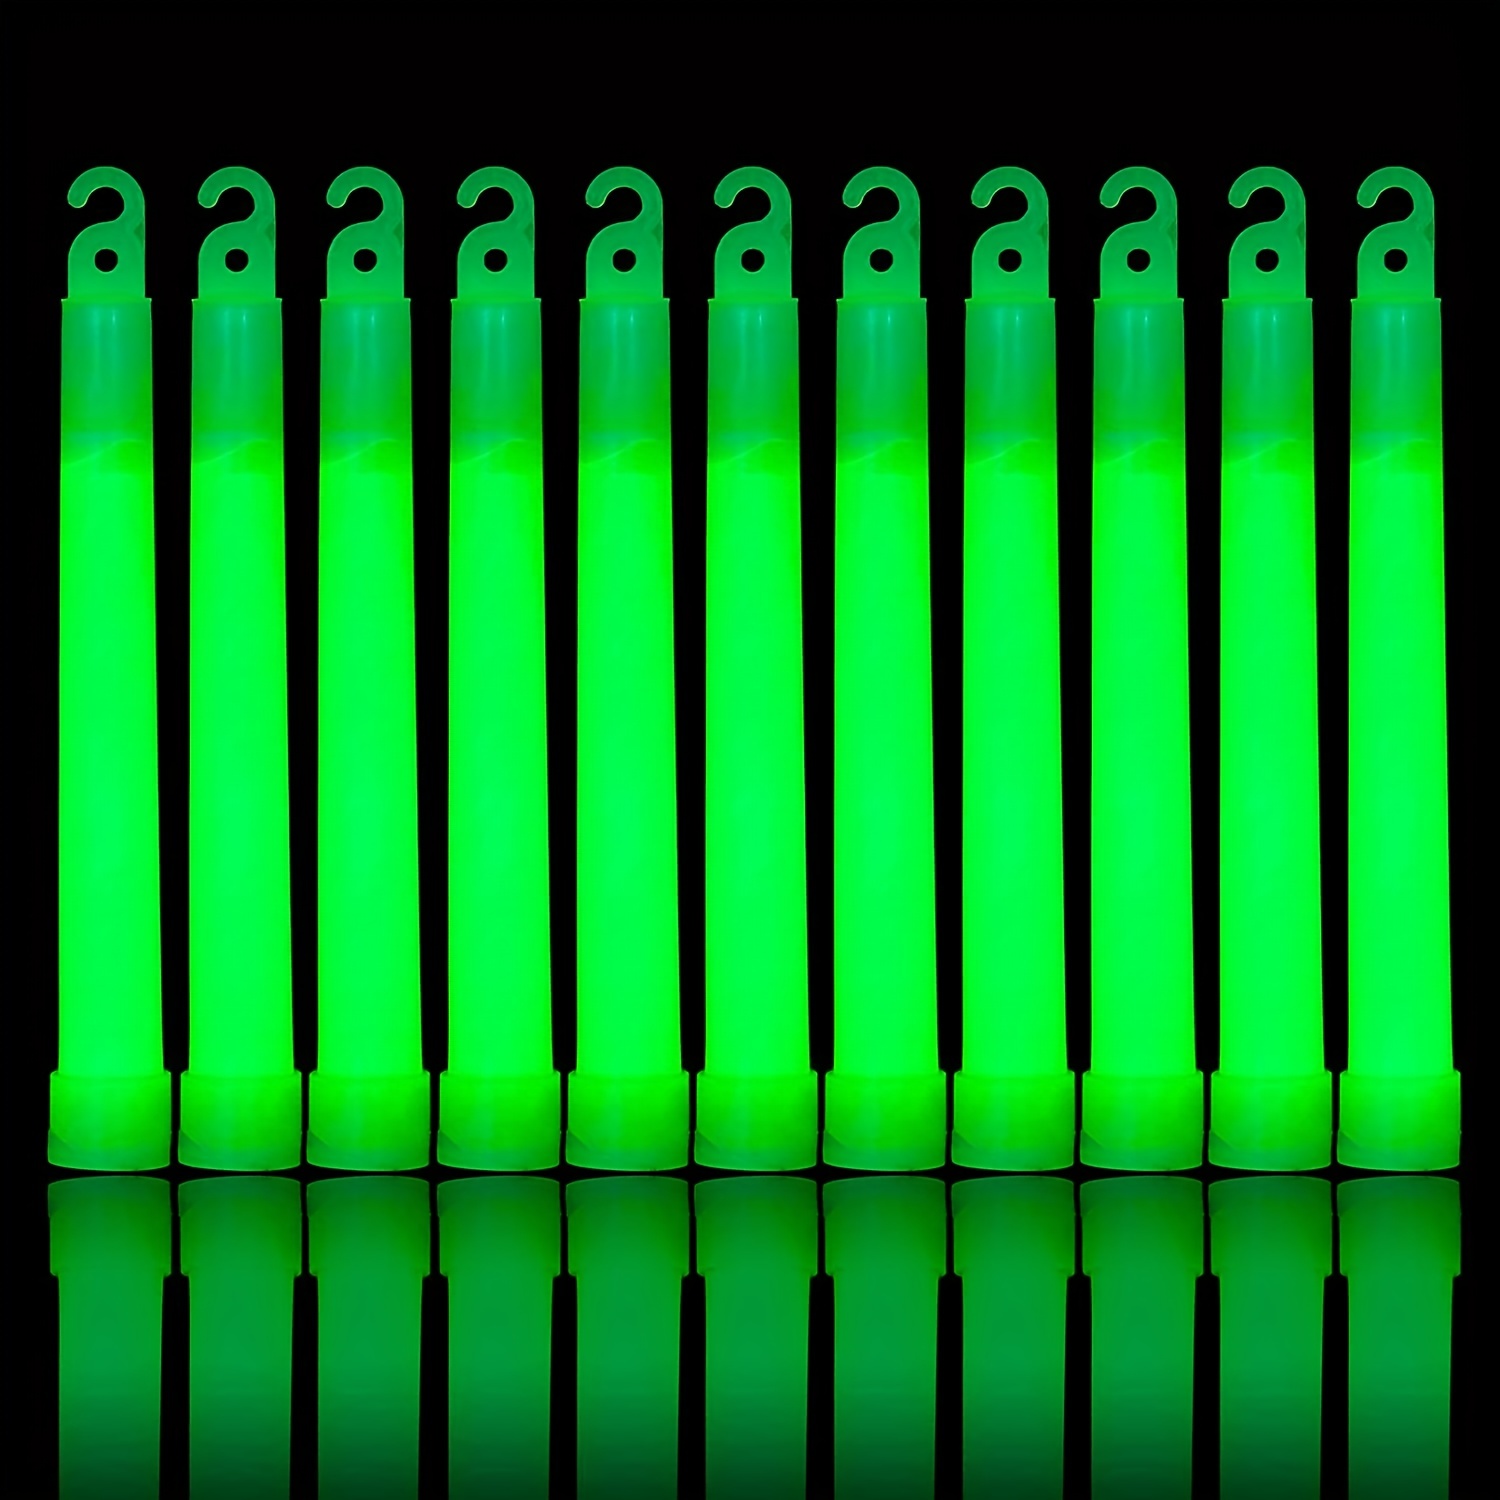  32 Ultra Bright 6 Inch Large Green Glow Sticks - Chem Lights  Sticks with 12 Hour Duration - Camping Glow Sticks, Emergency Glow Sticks  For Storms Blackouts - Glowsticks for Parties